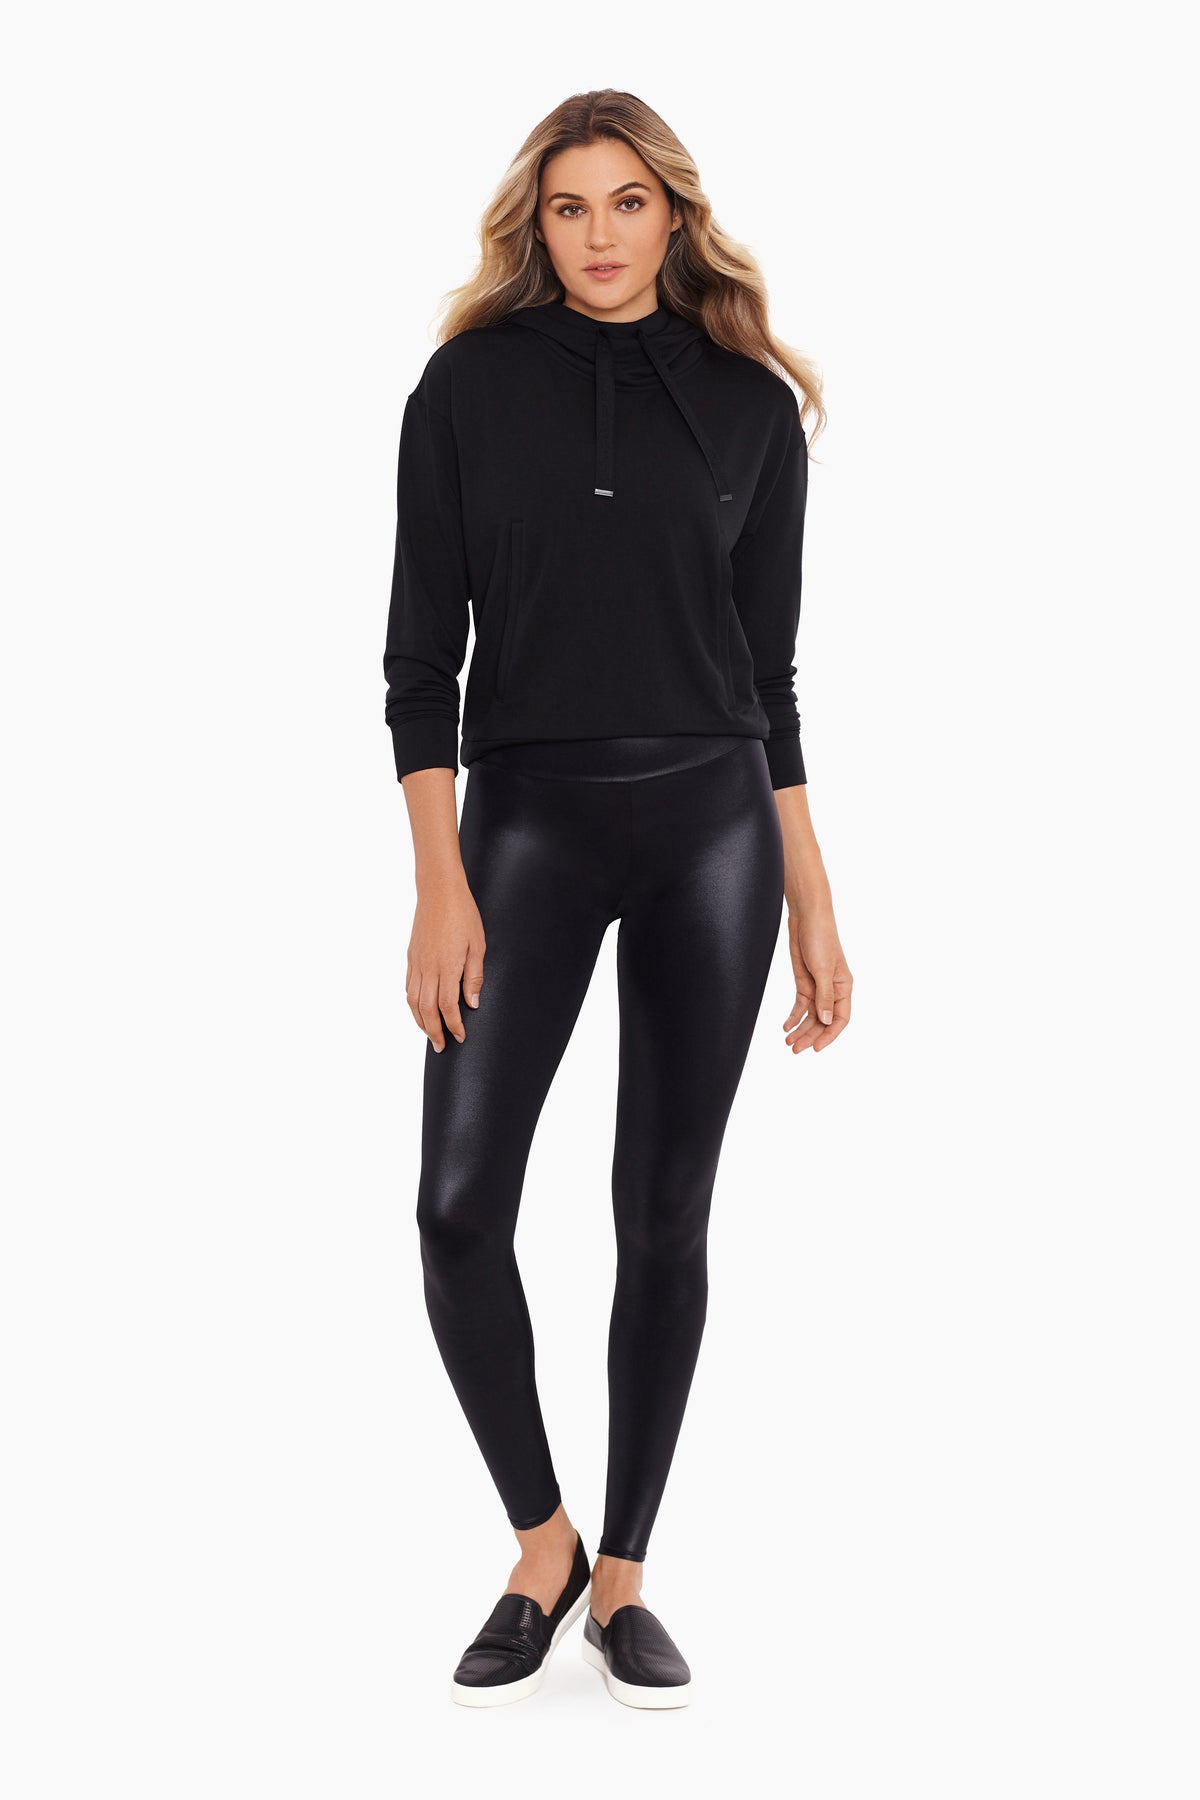 Miraclesuit High-Rise Cire Athleisure Legging